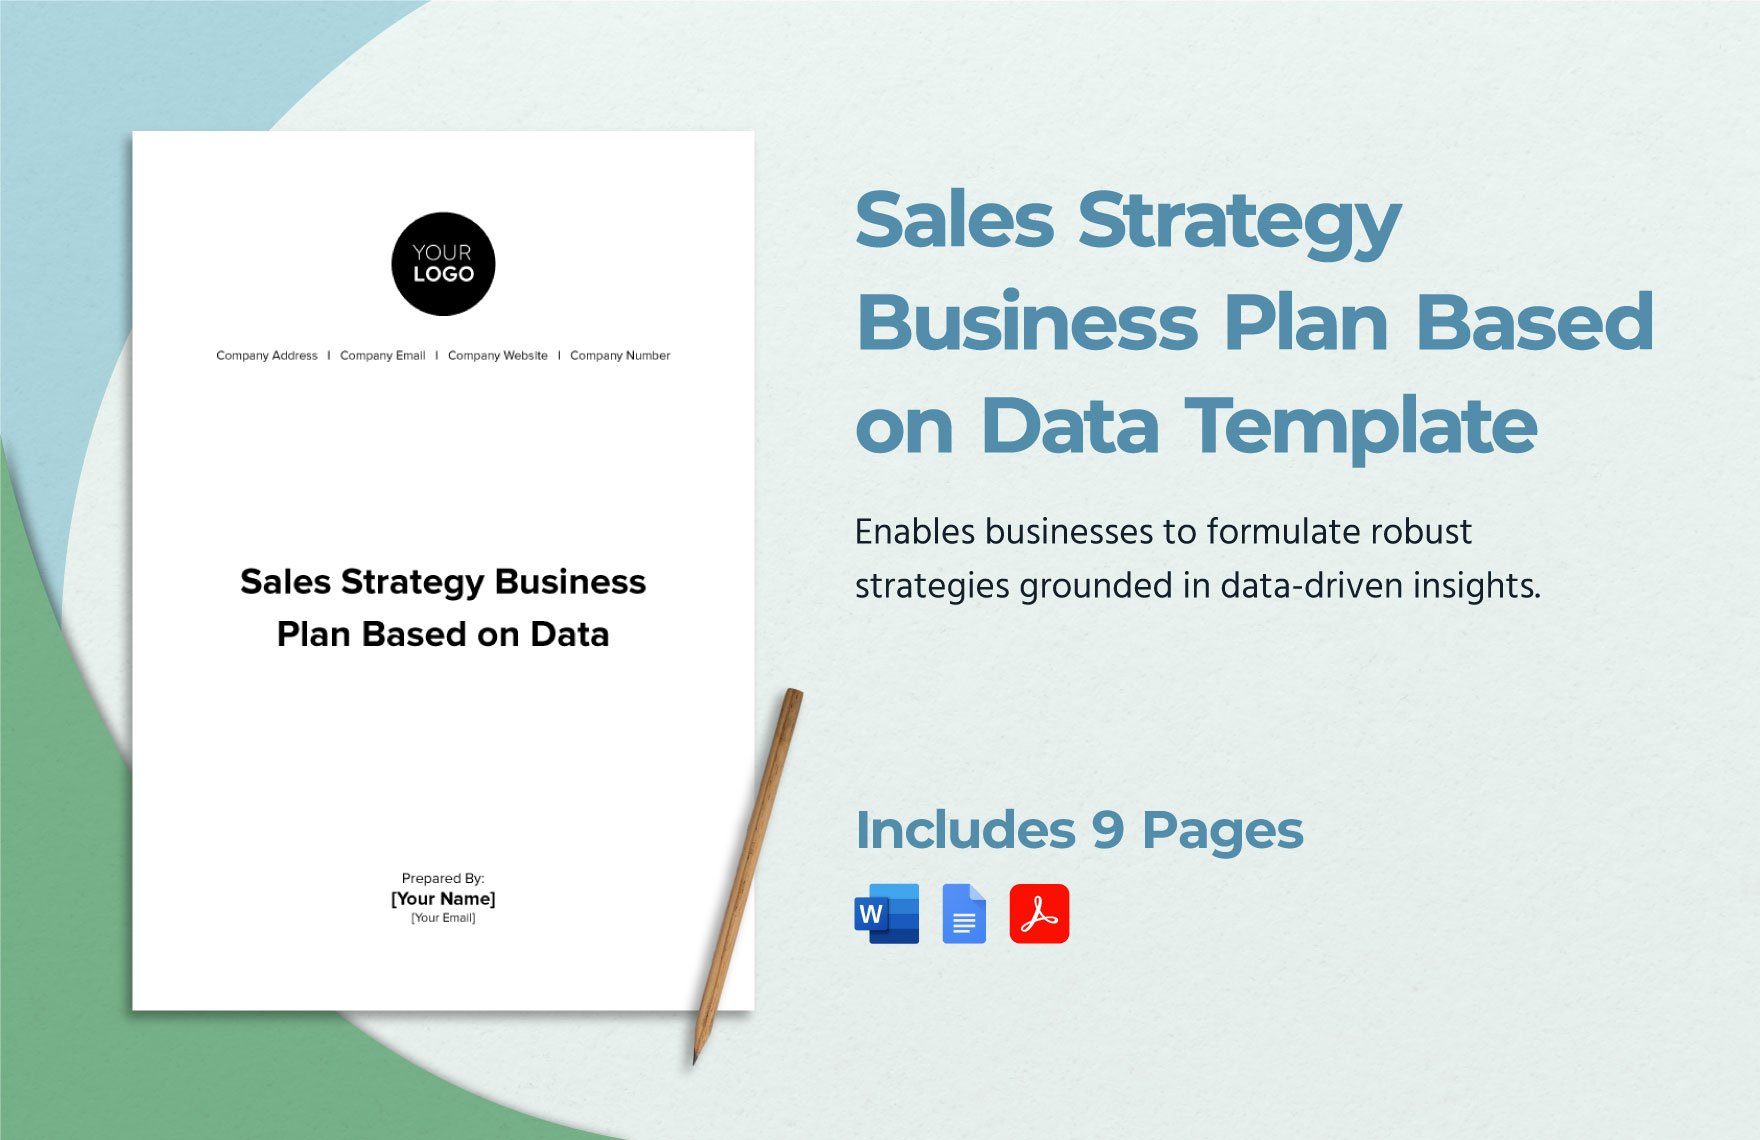 Sales Strategy Business Plan Based on Data Template